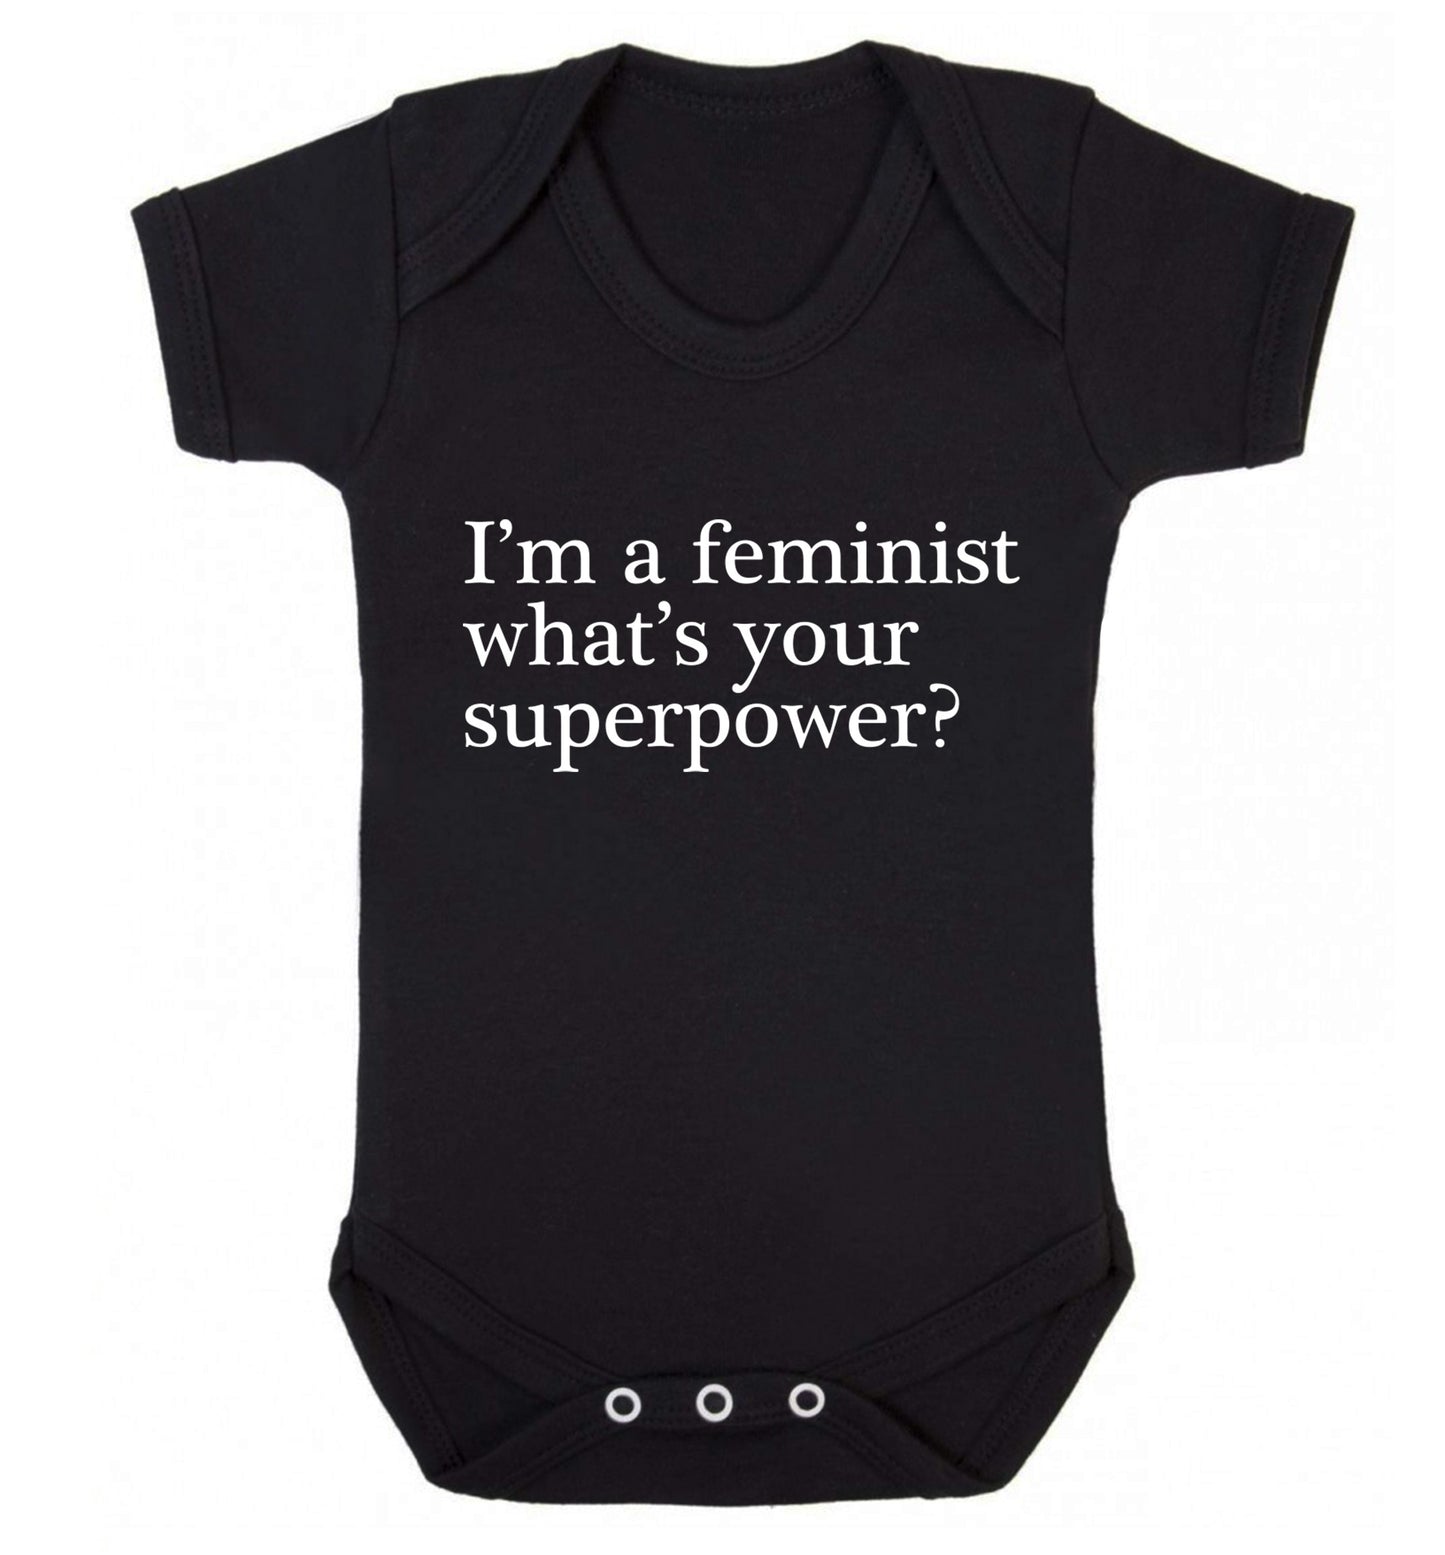 I'm a feminist what's your superpower? Baby Vest black 18-24 months